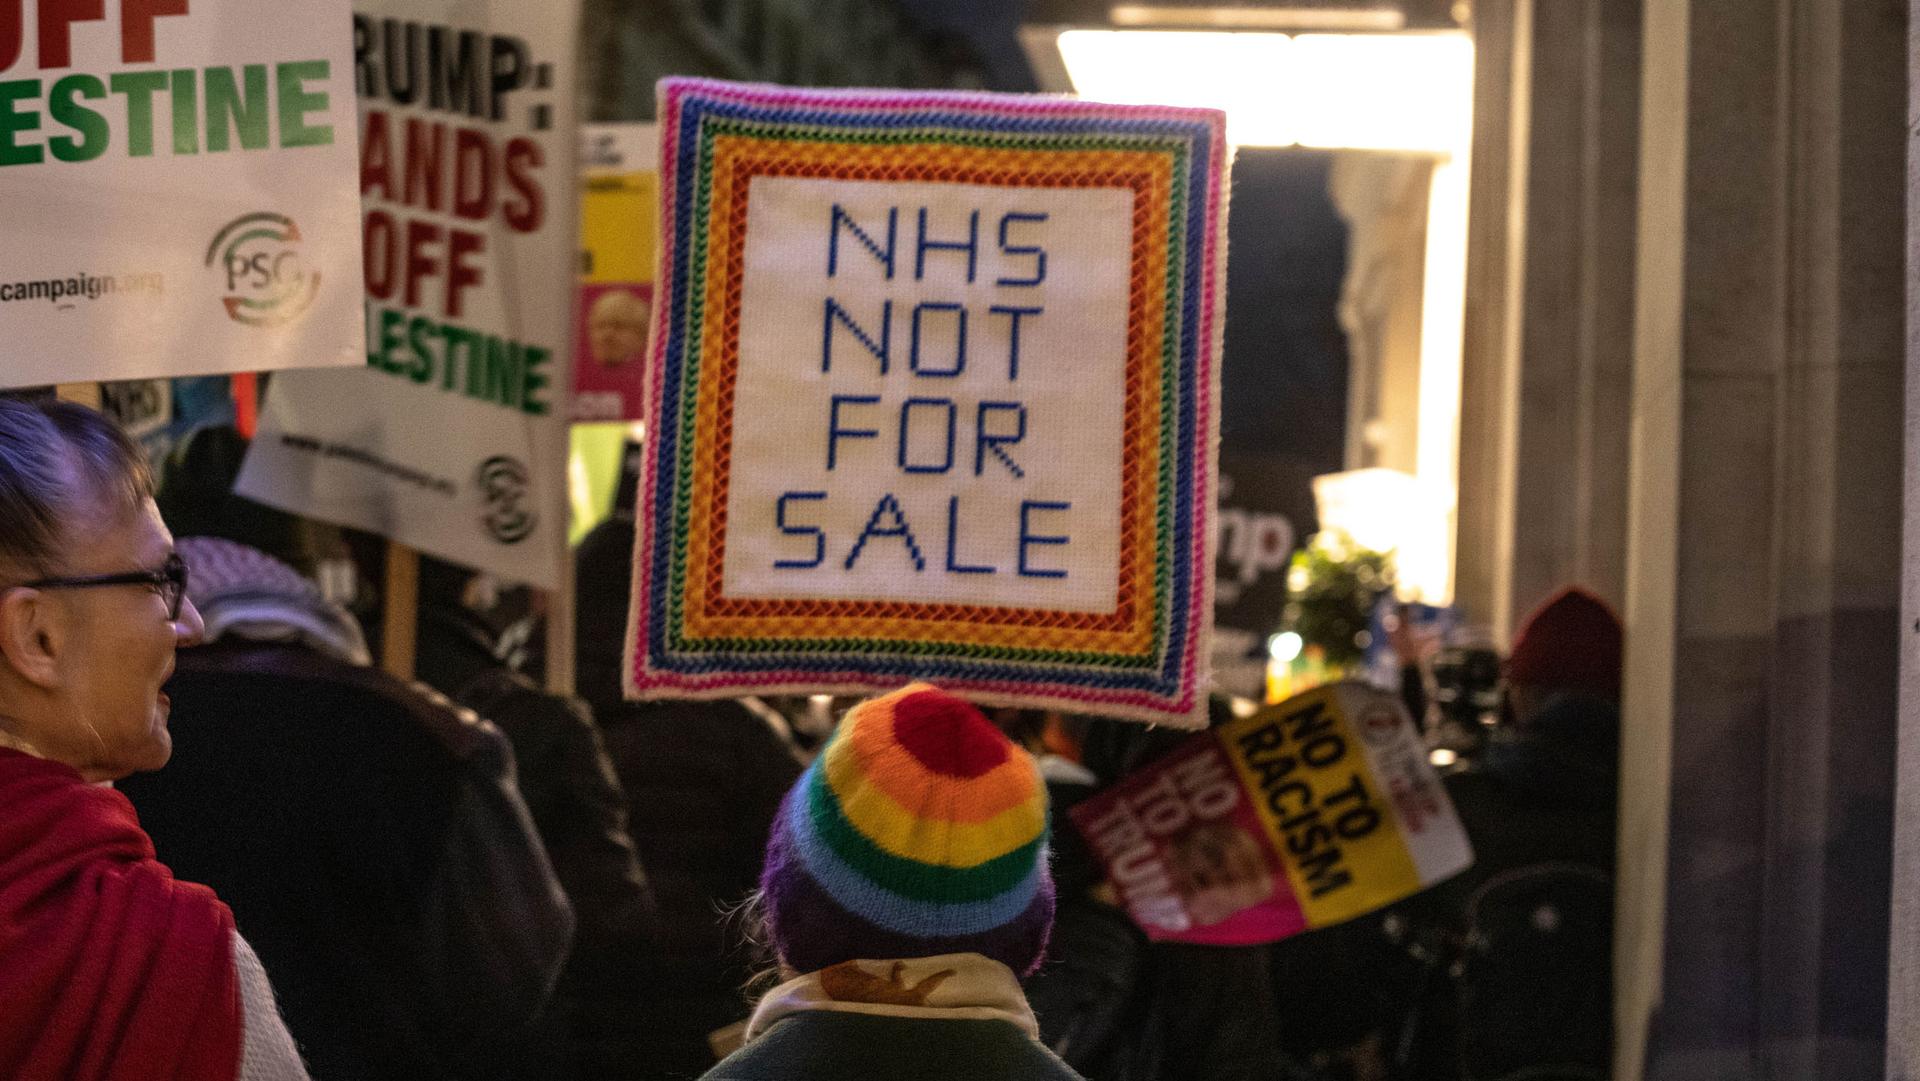 A protester stands with a sign reading "NHS NOT FOR SALE"